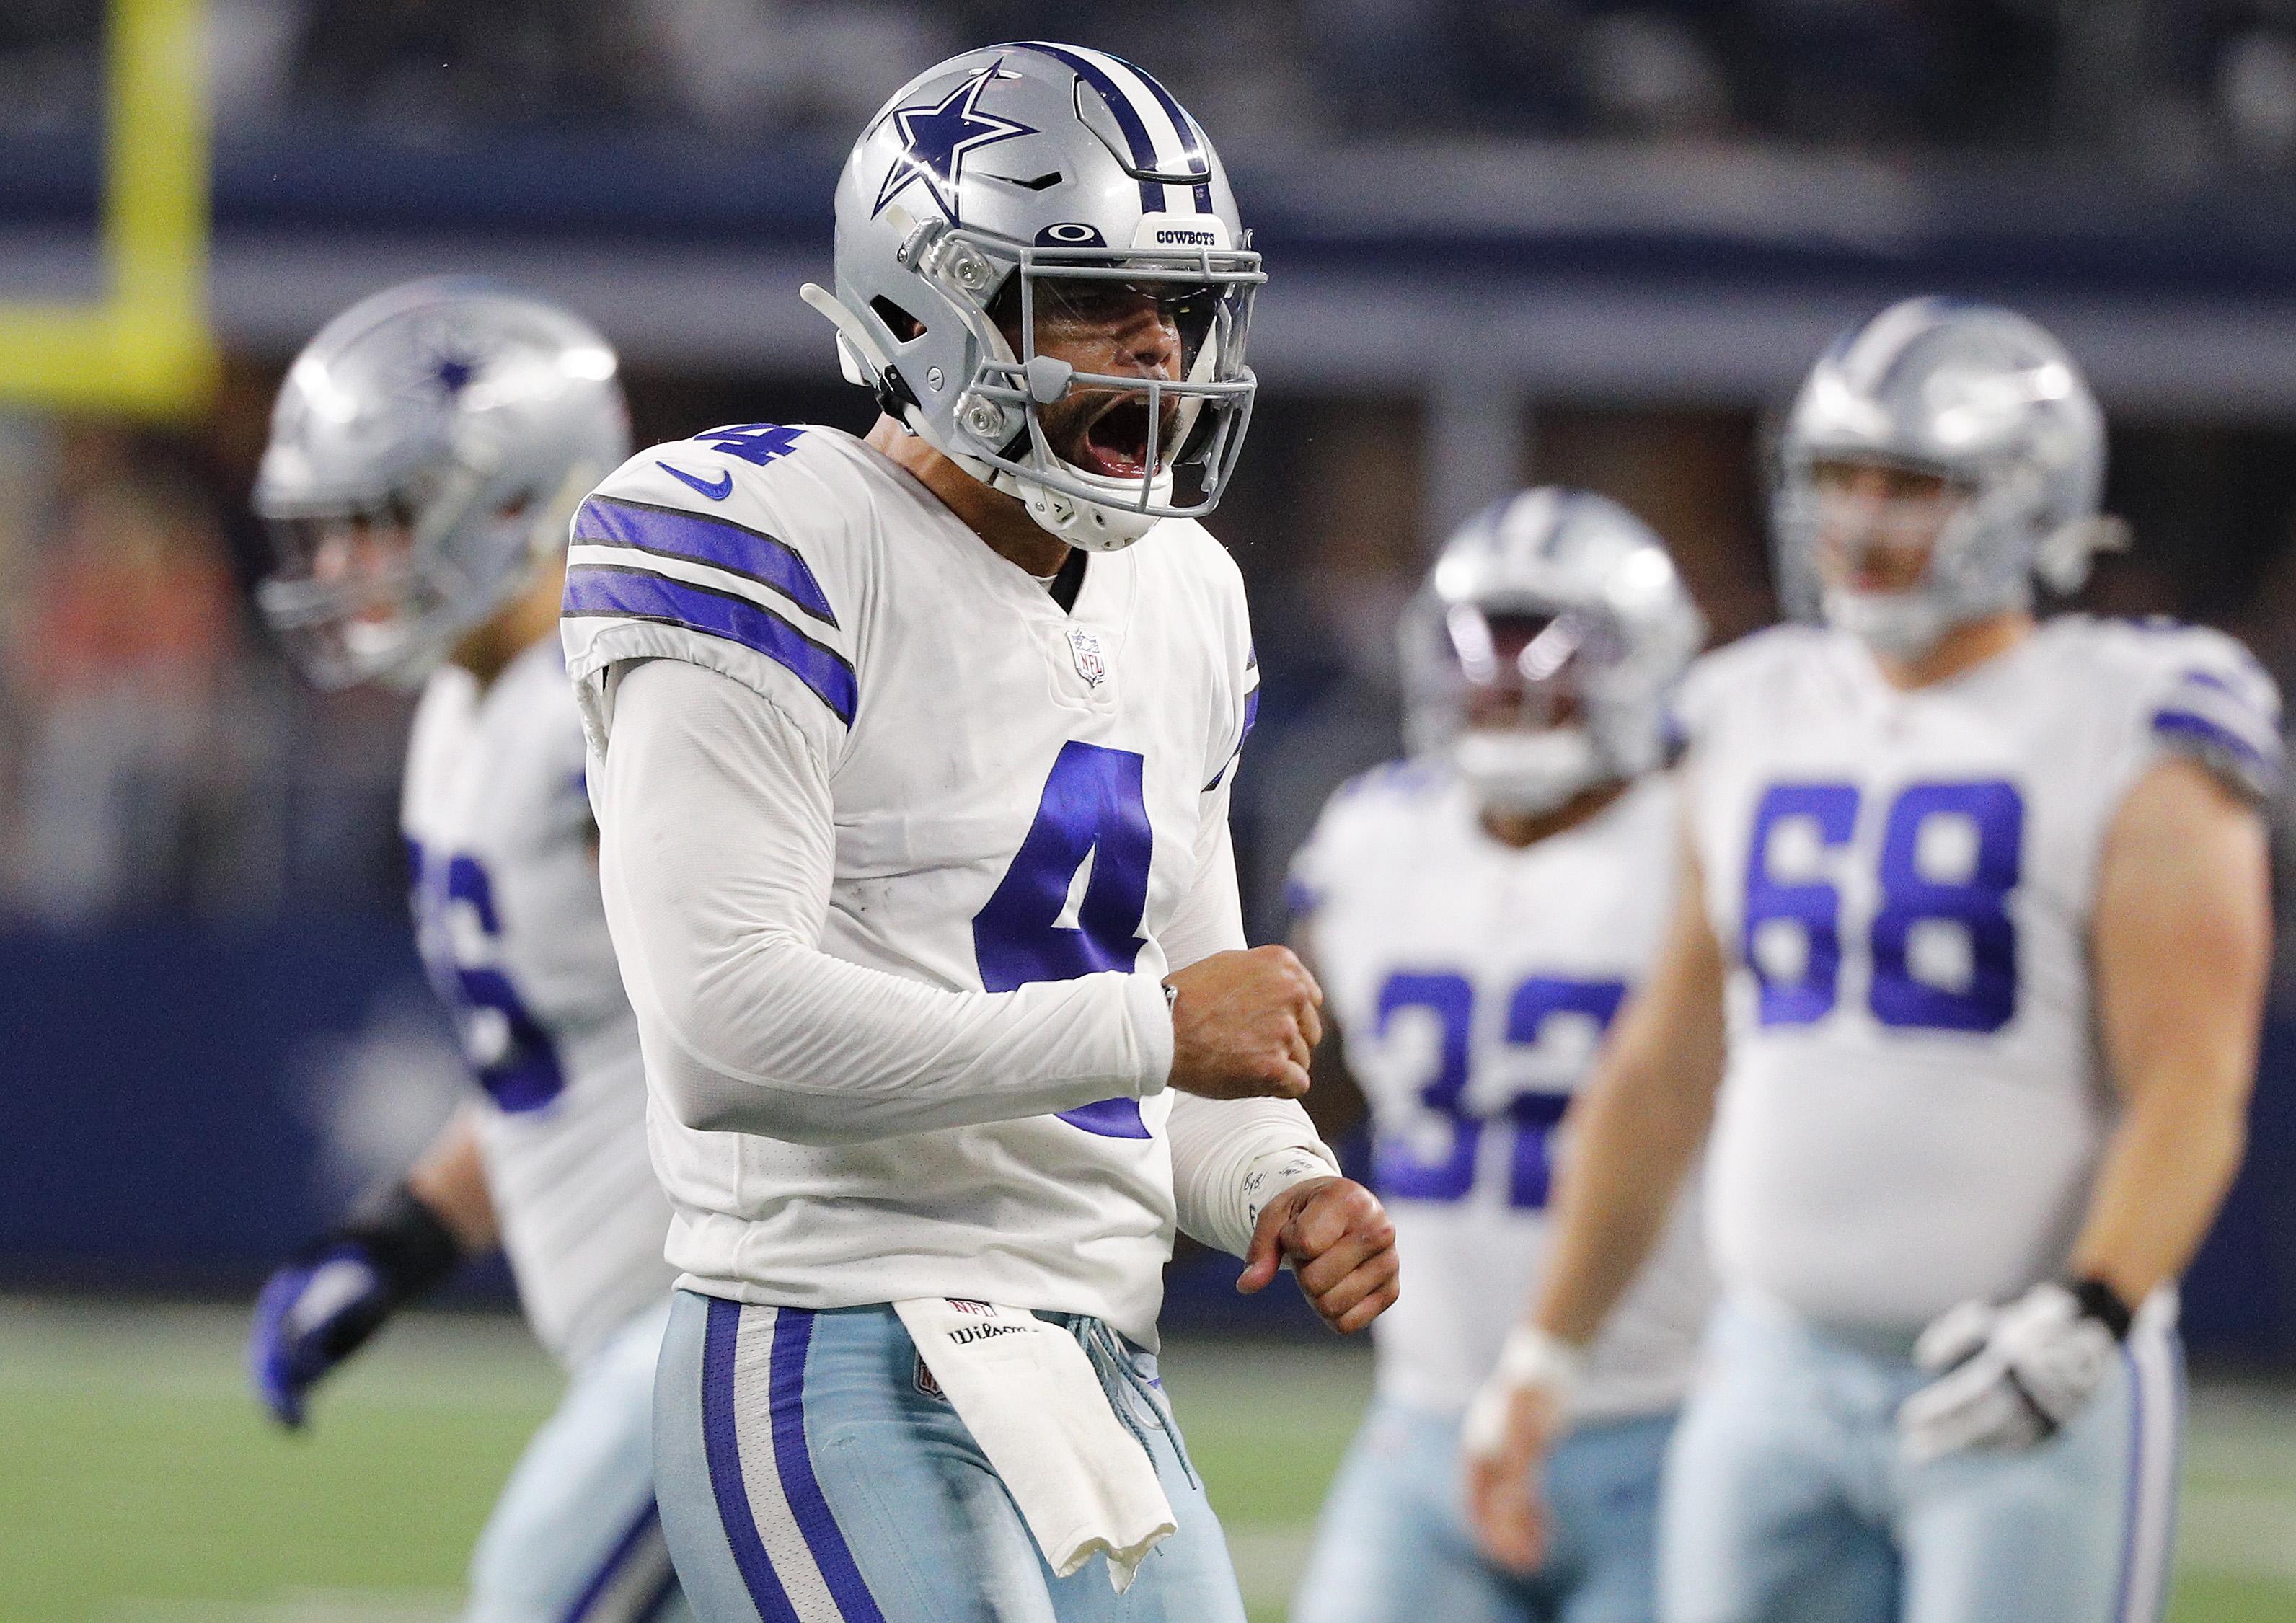 Dak Prescott completed 28/39 passes for 330 yards and four touchdowns. 